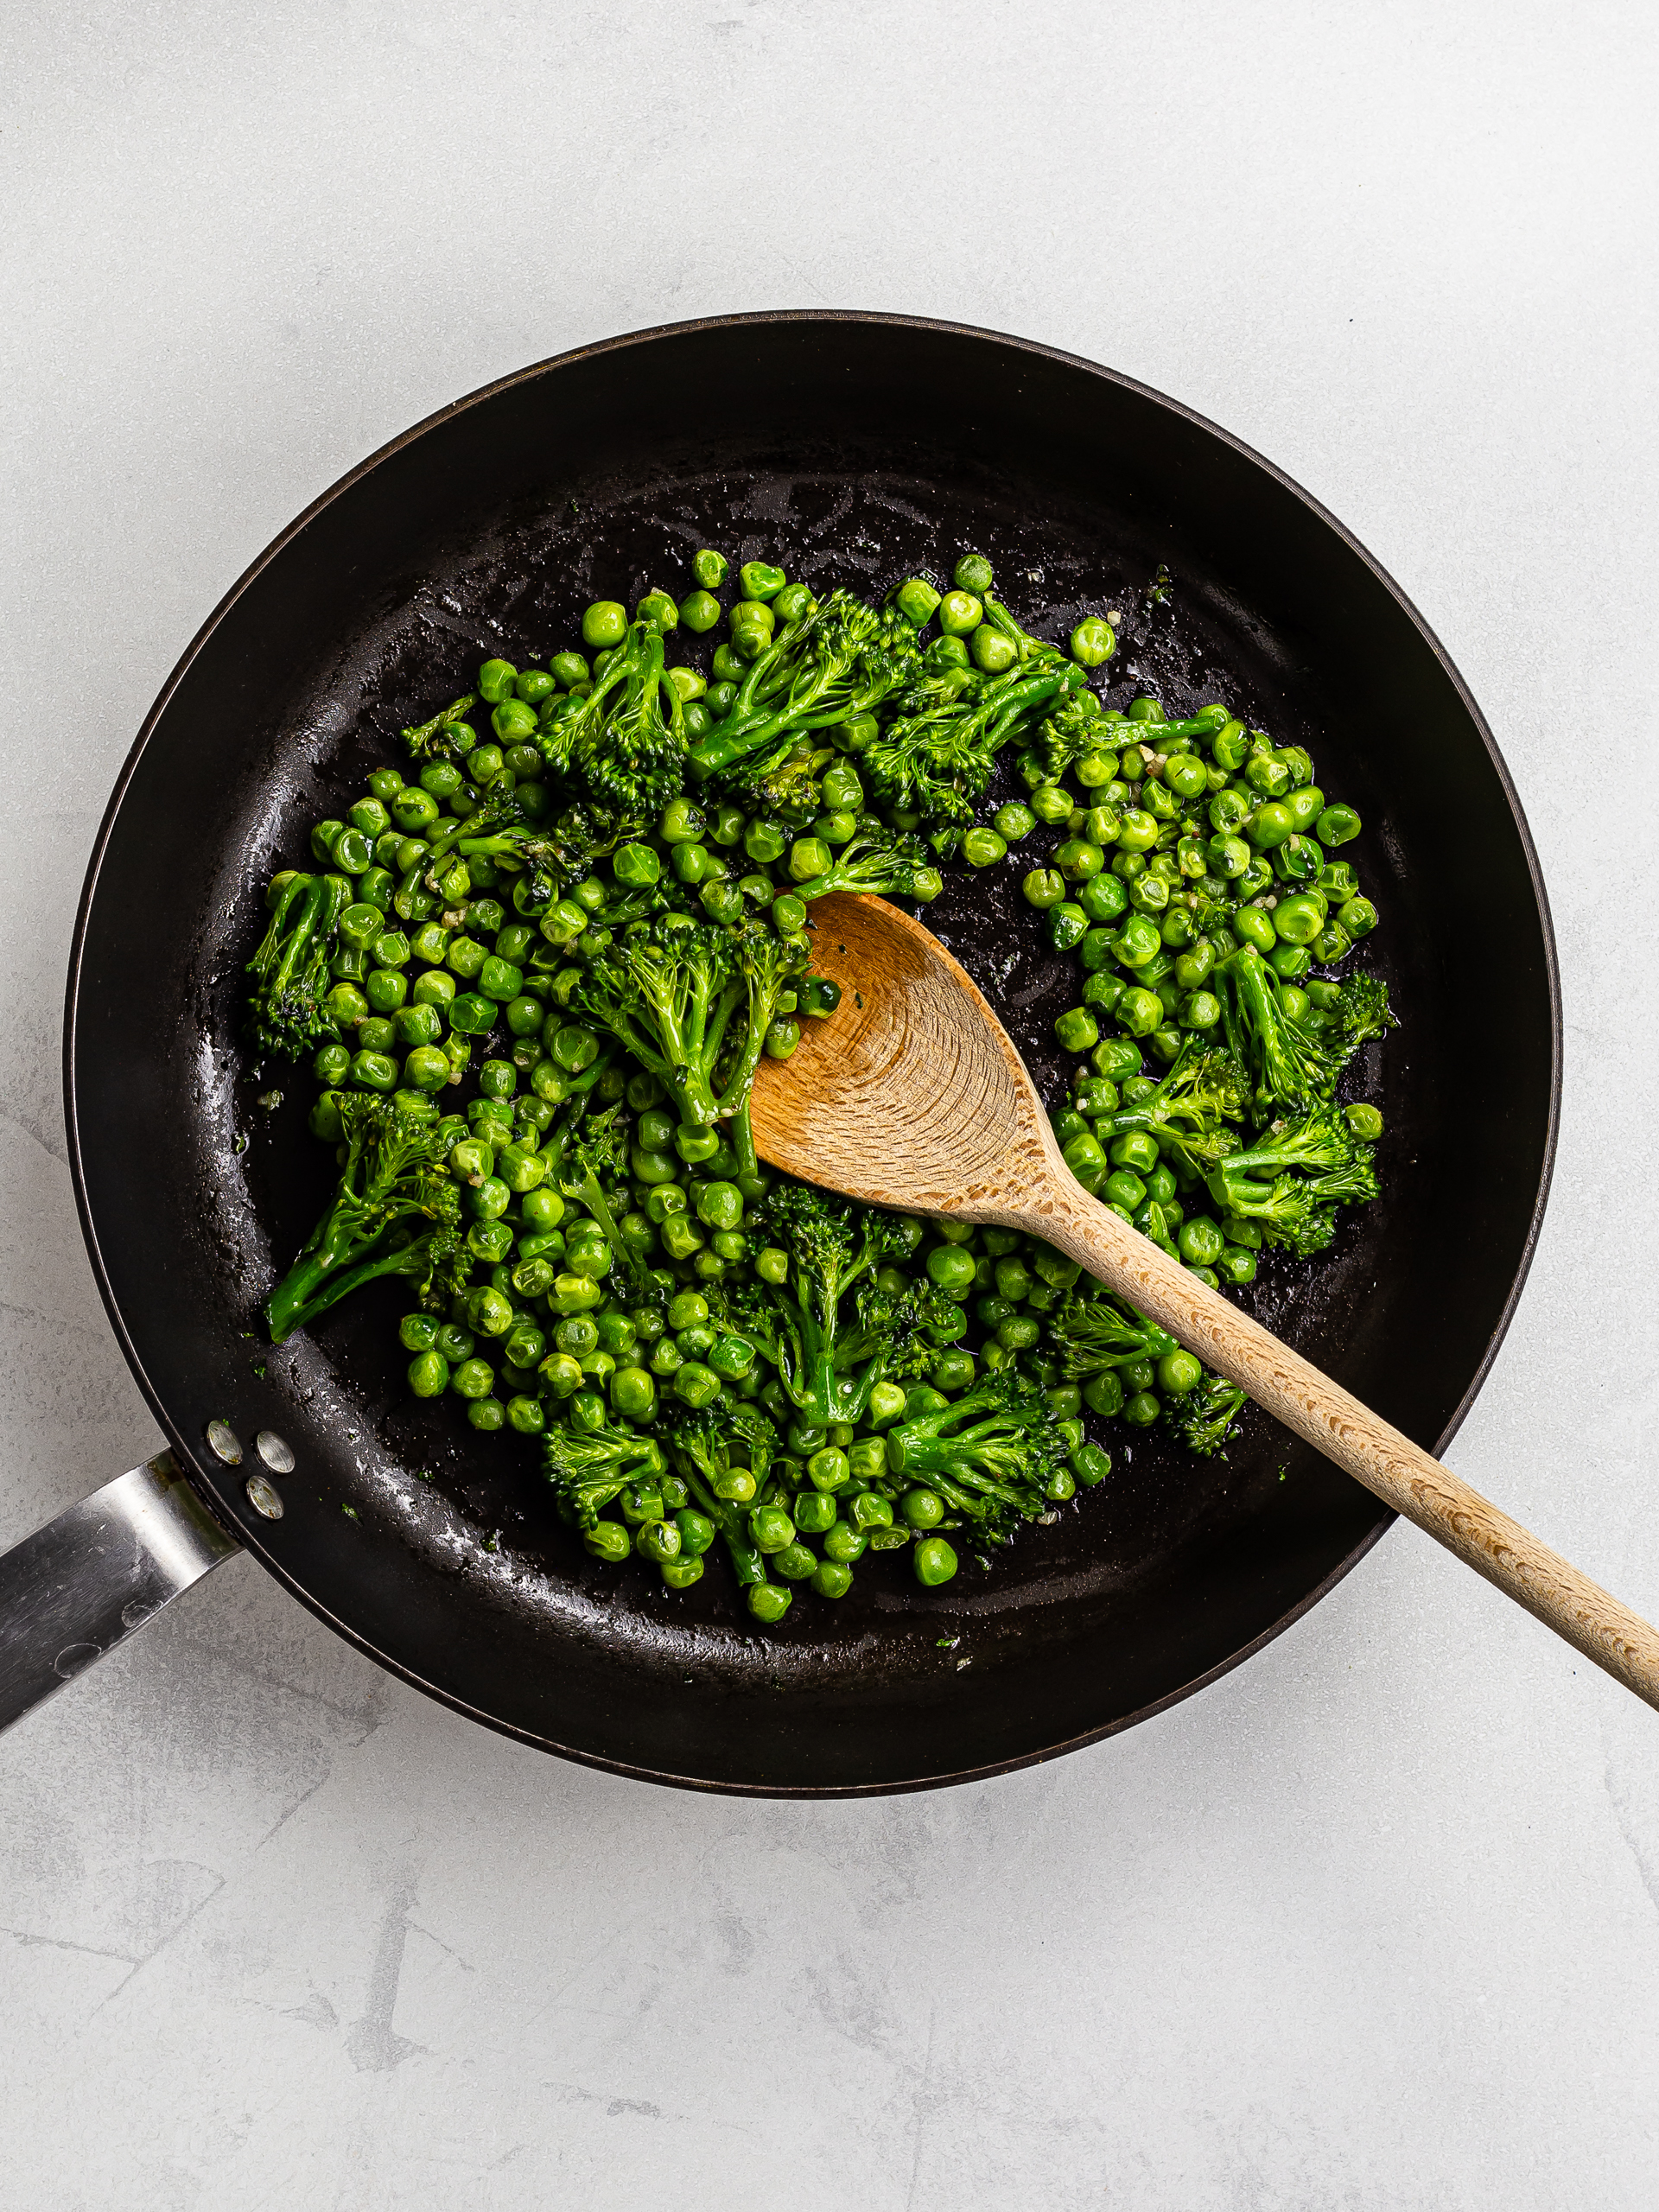 peas and broccoli cooked in a skillet with parsley